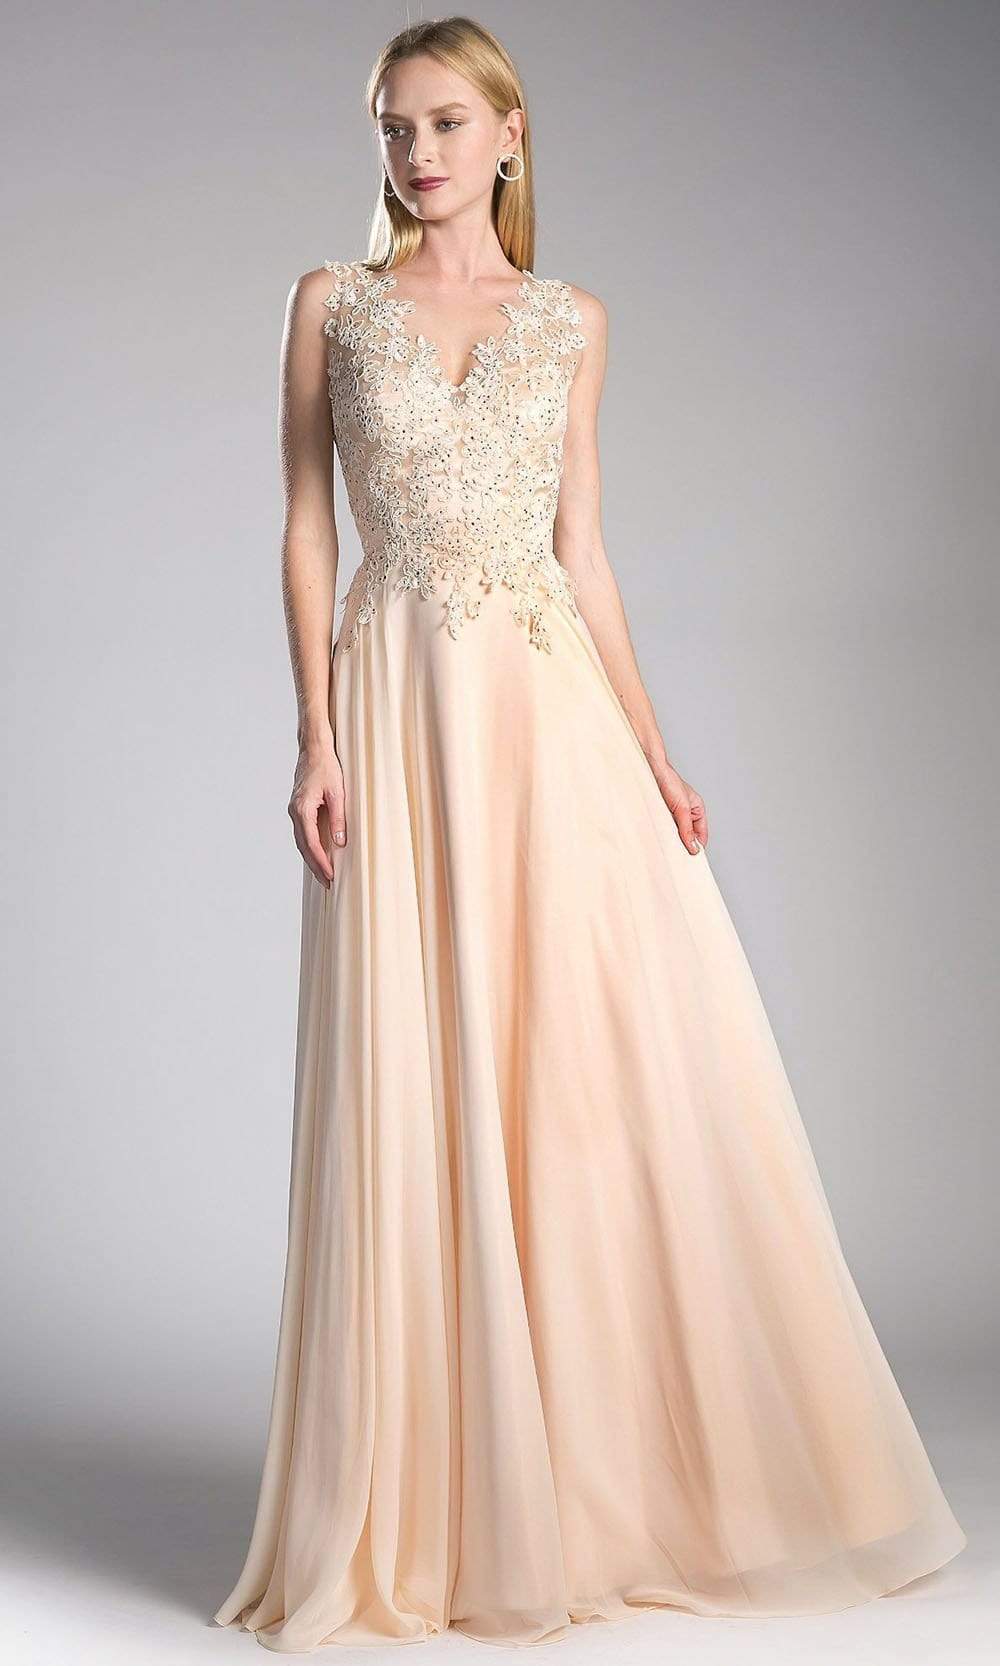 Cinderella Divine - 9177 Beaded Lace V-neck A-line Dress in Neutral